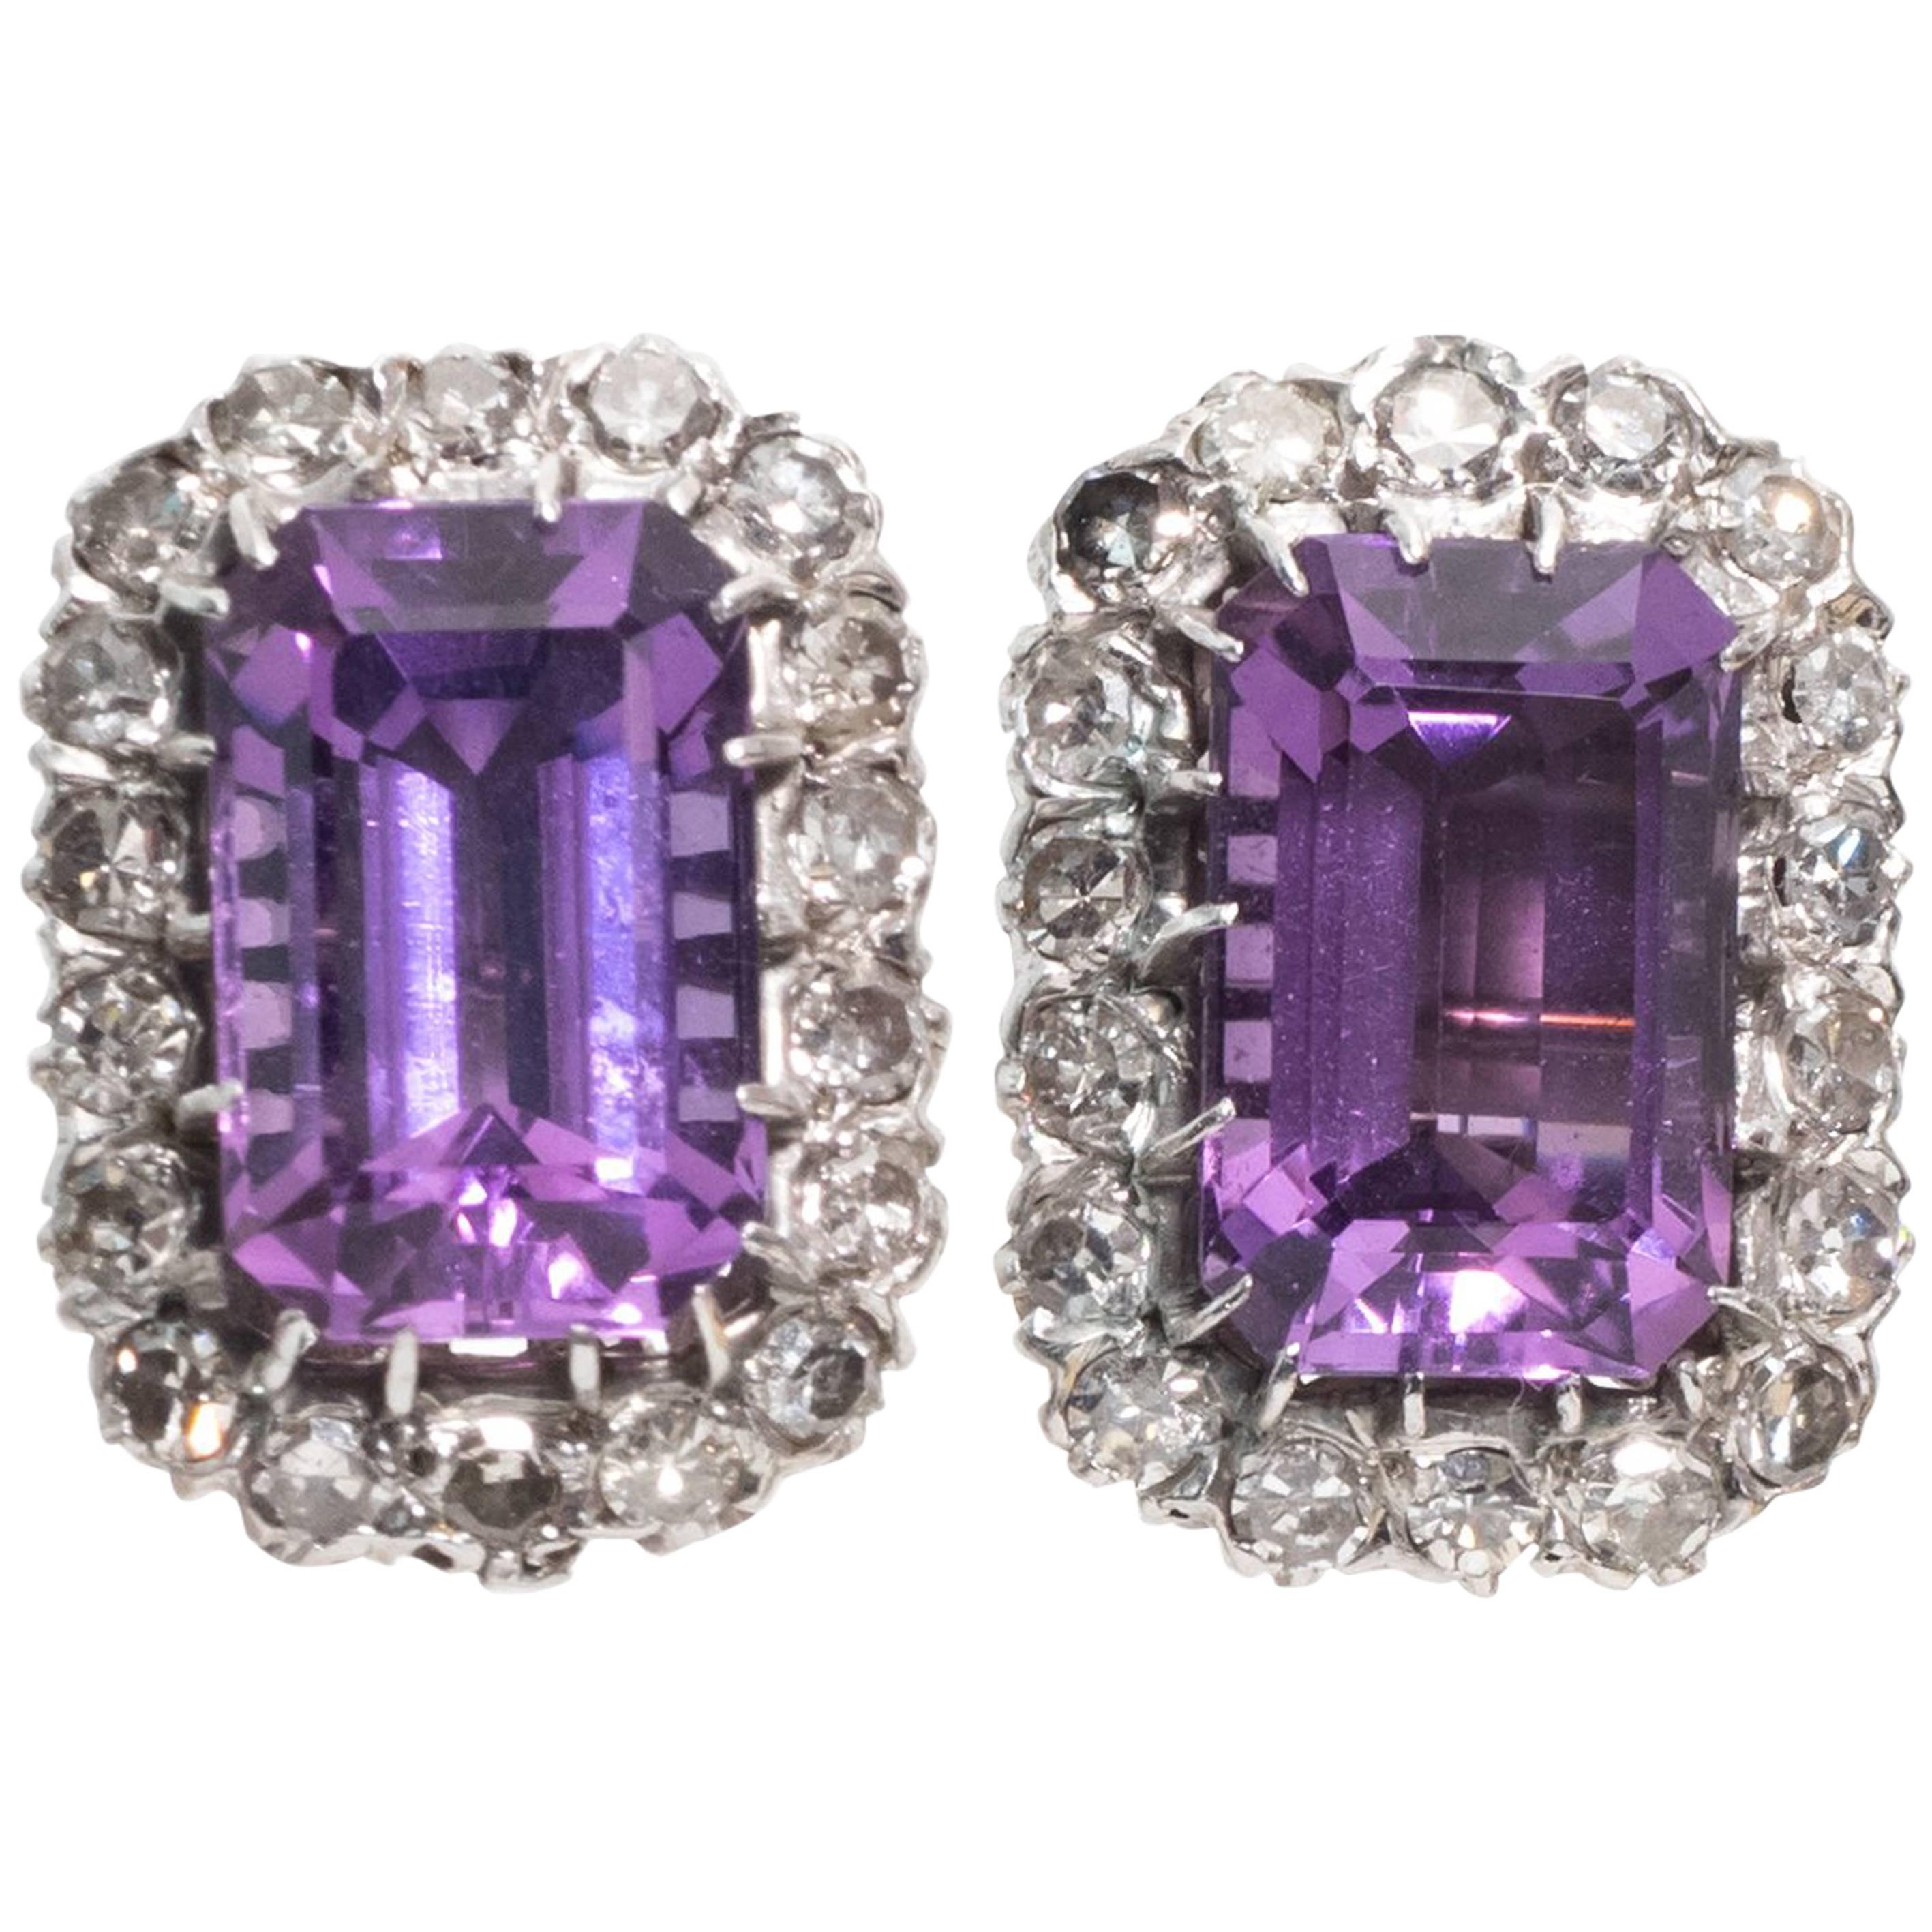 1930s 10 carat total Amethyst, Diamond and 14 karat White Gold Clip On Earrings